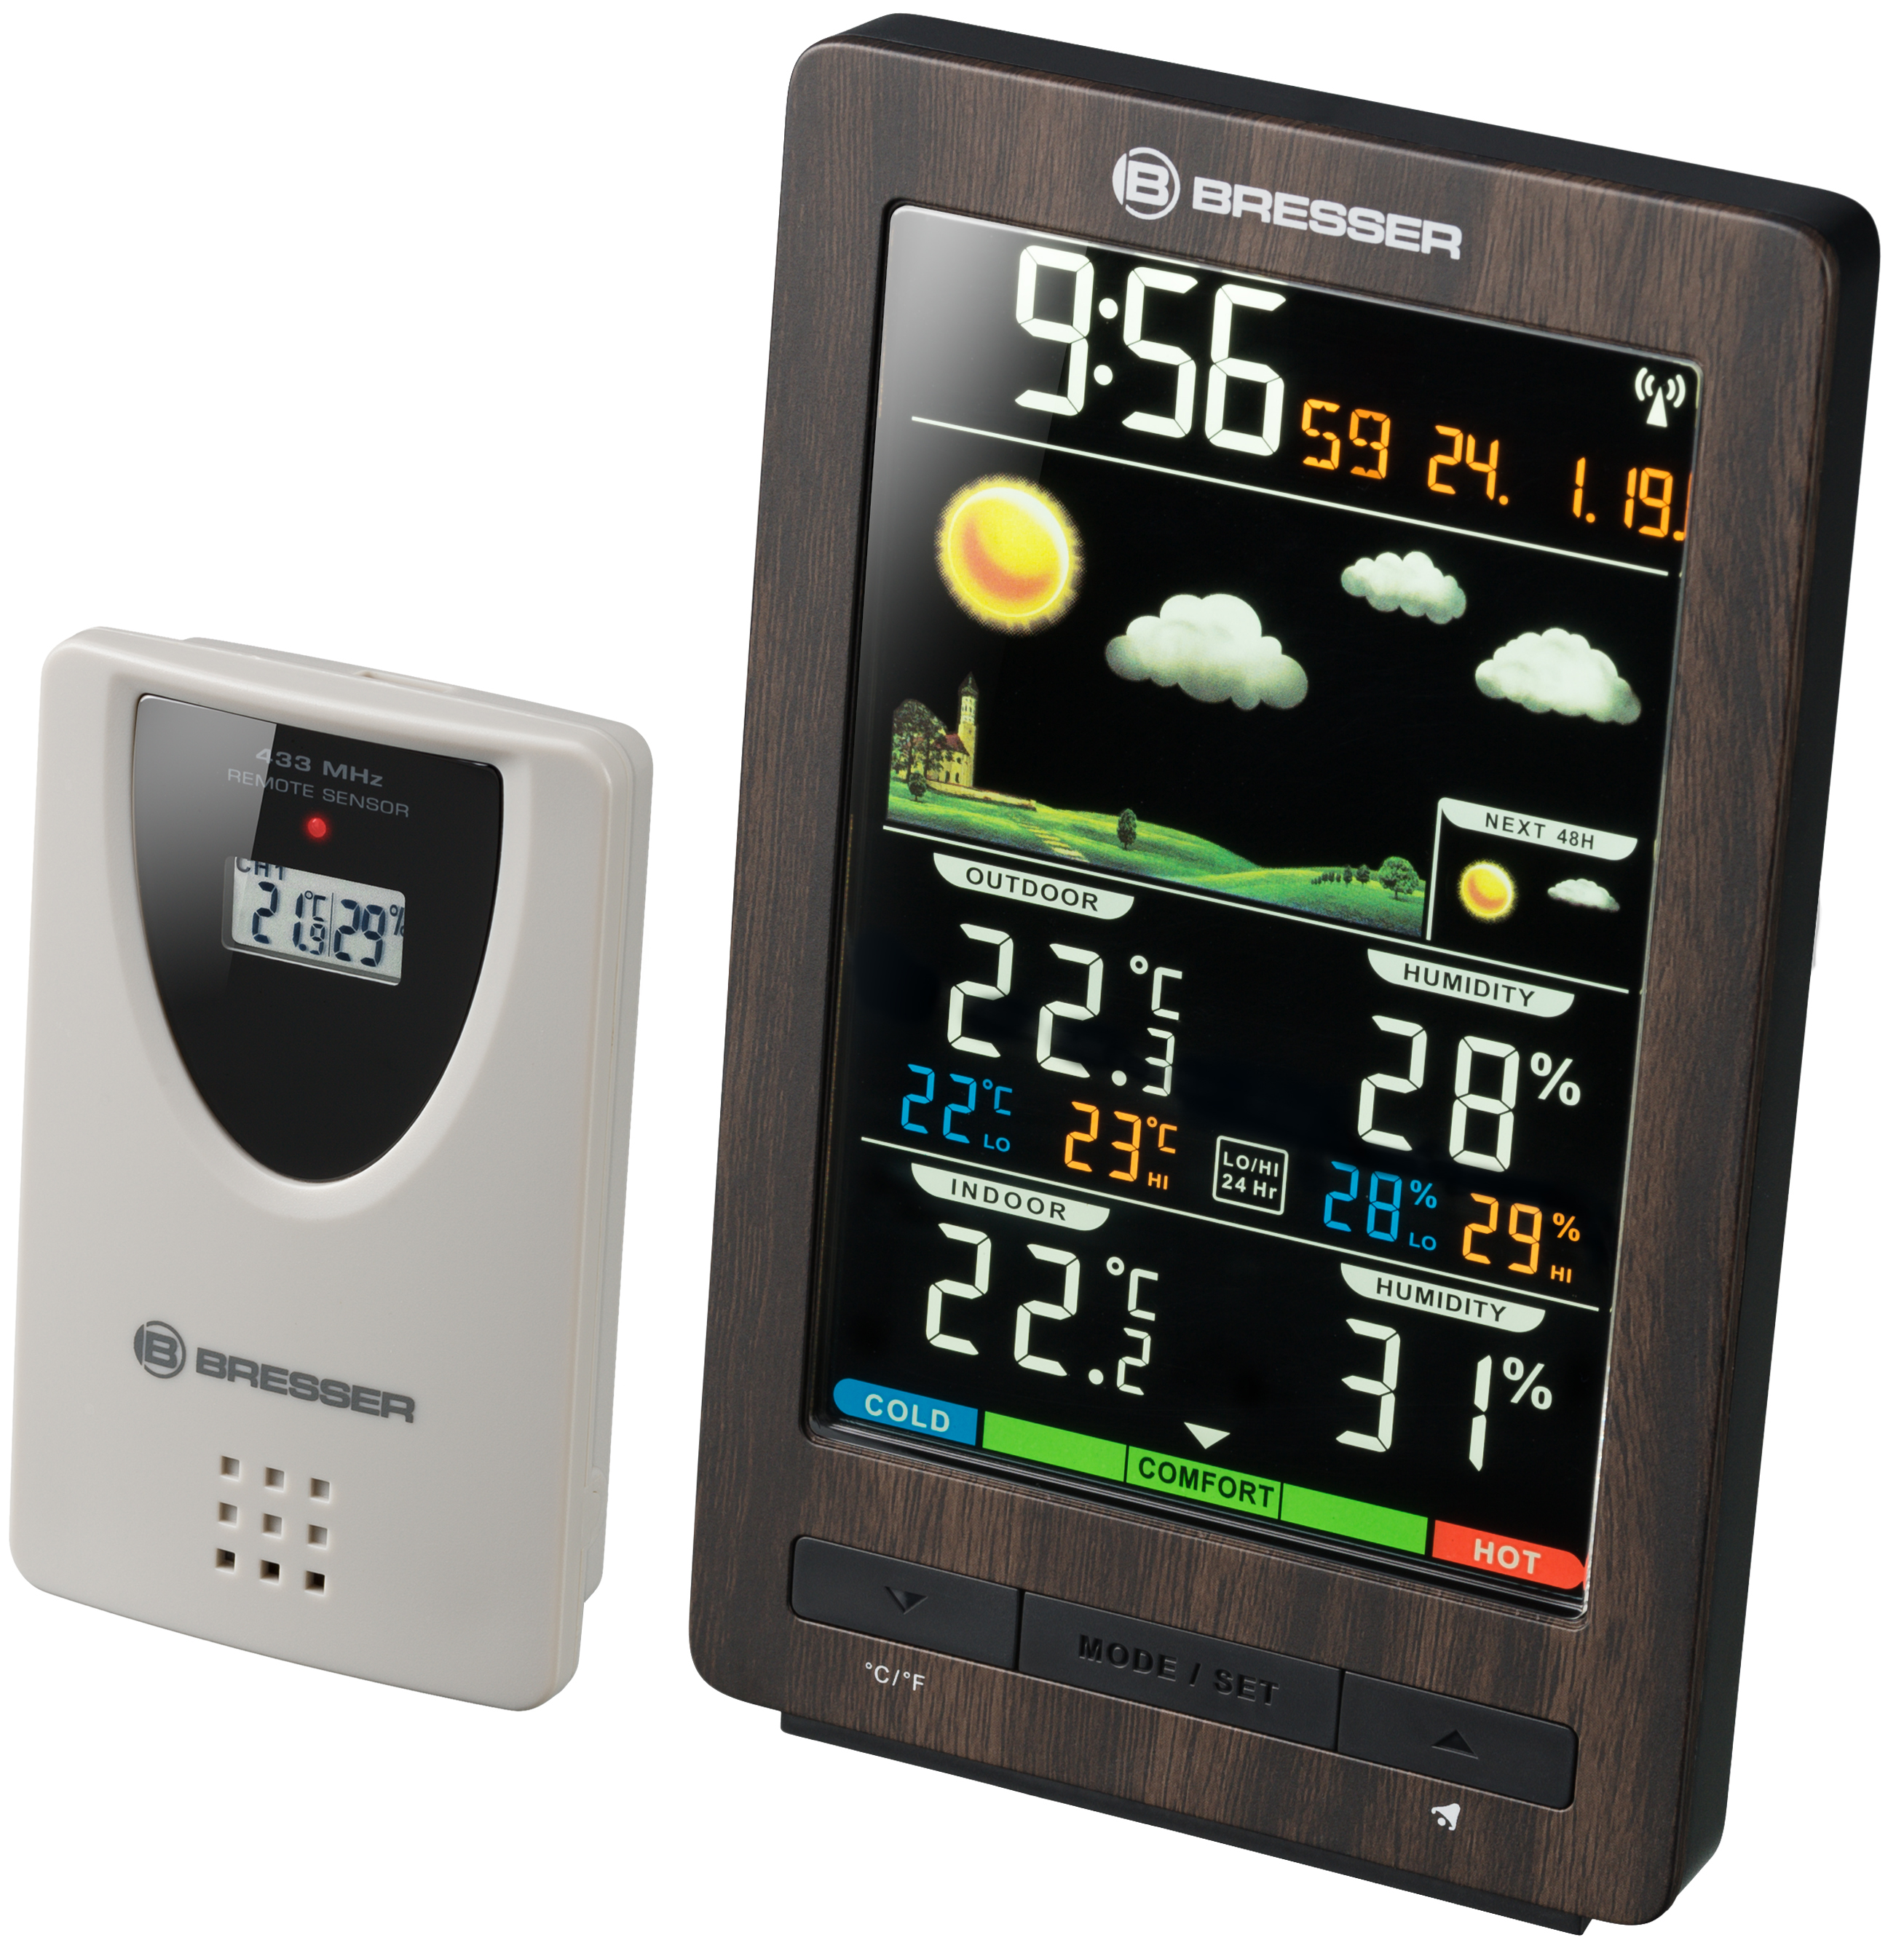 BRESSER ClimaTrend WS Weather Station with Colour Display in wooden Design (Refurbished)